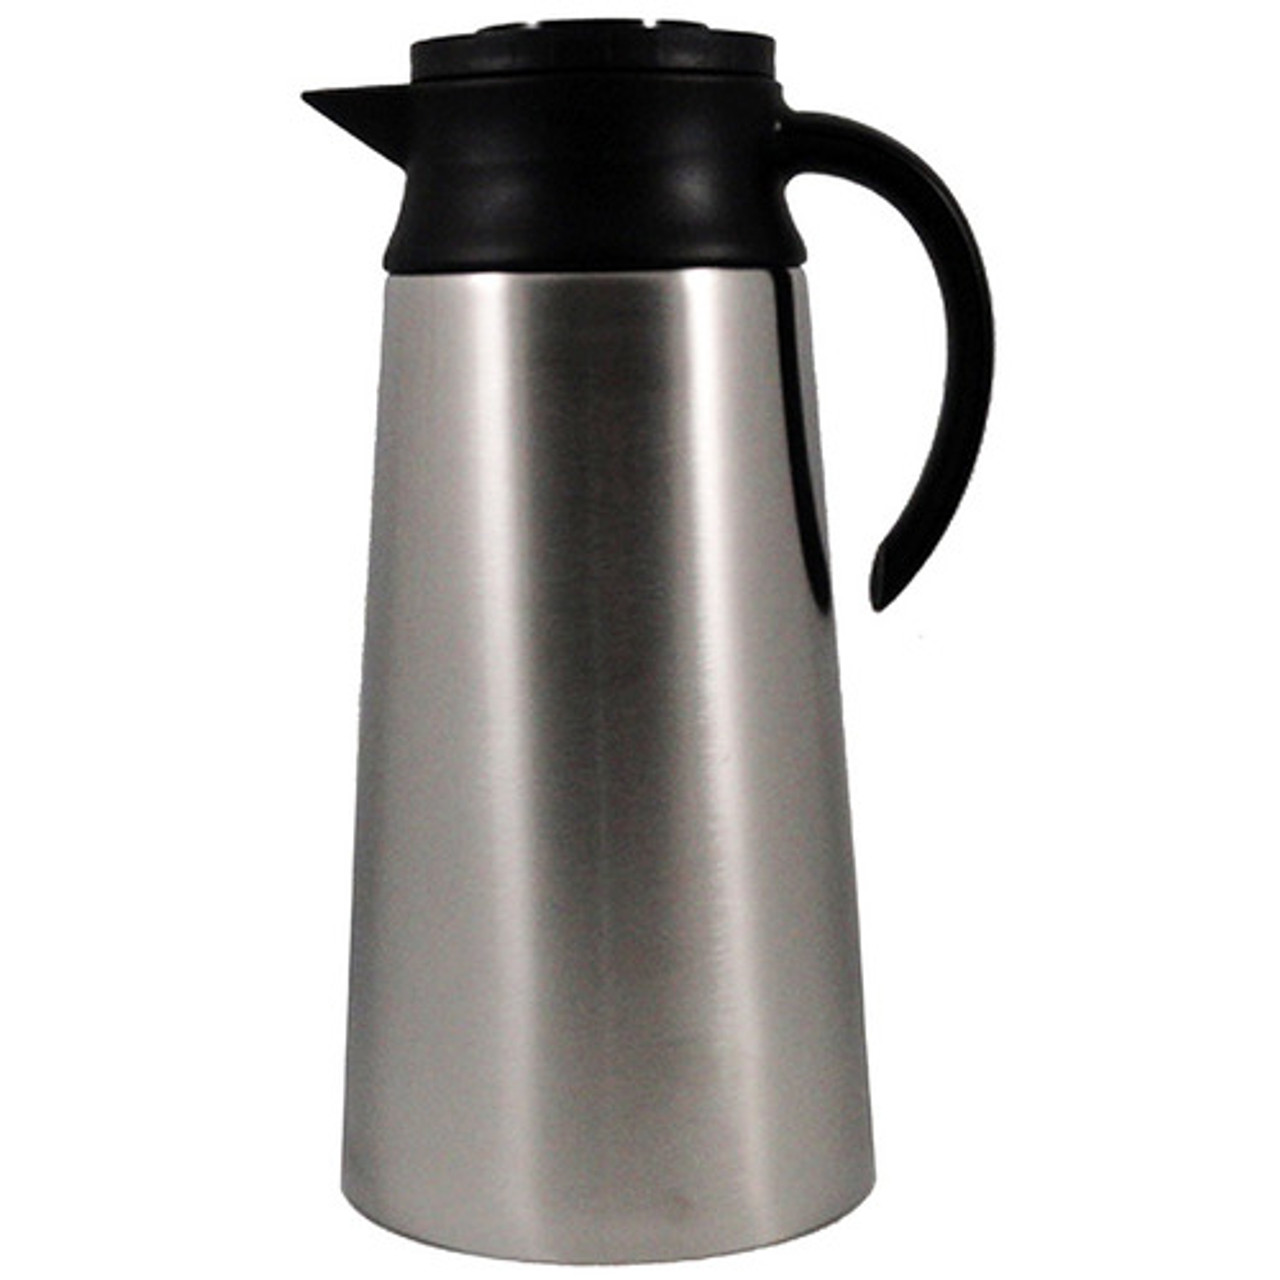  68 Oz Thermal Coffee Carafe,2 Liter Stainless Steel